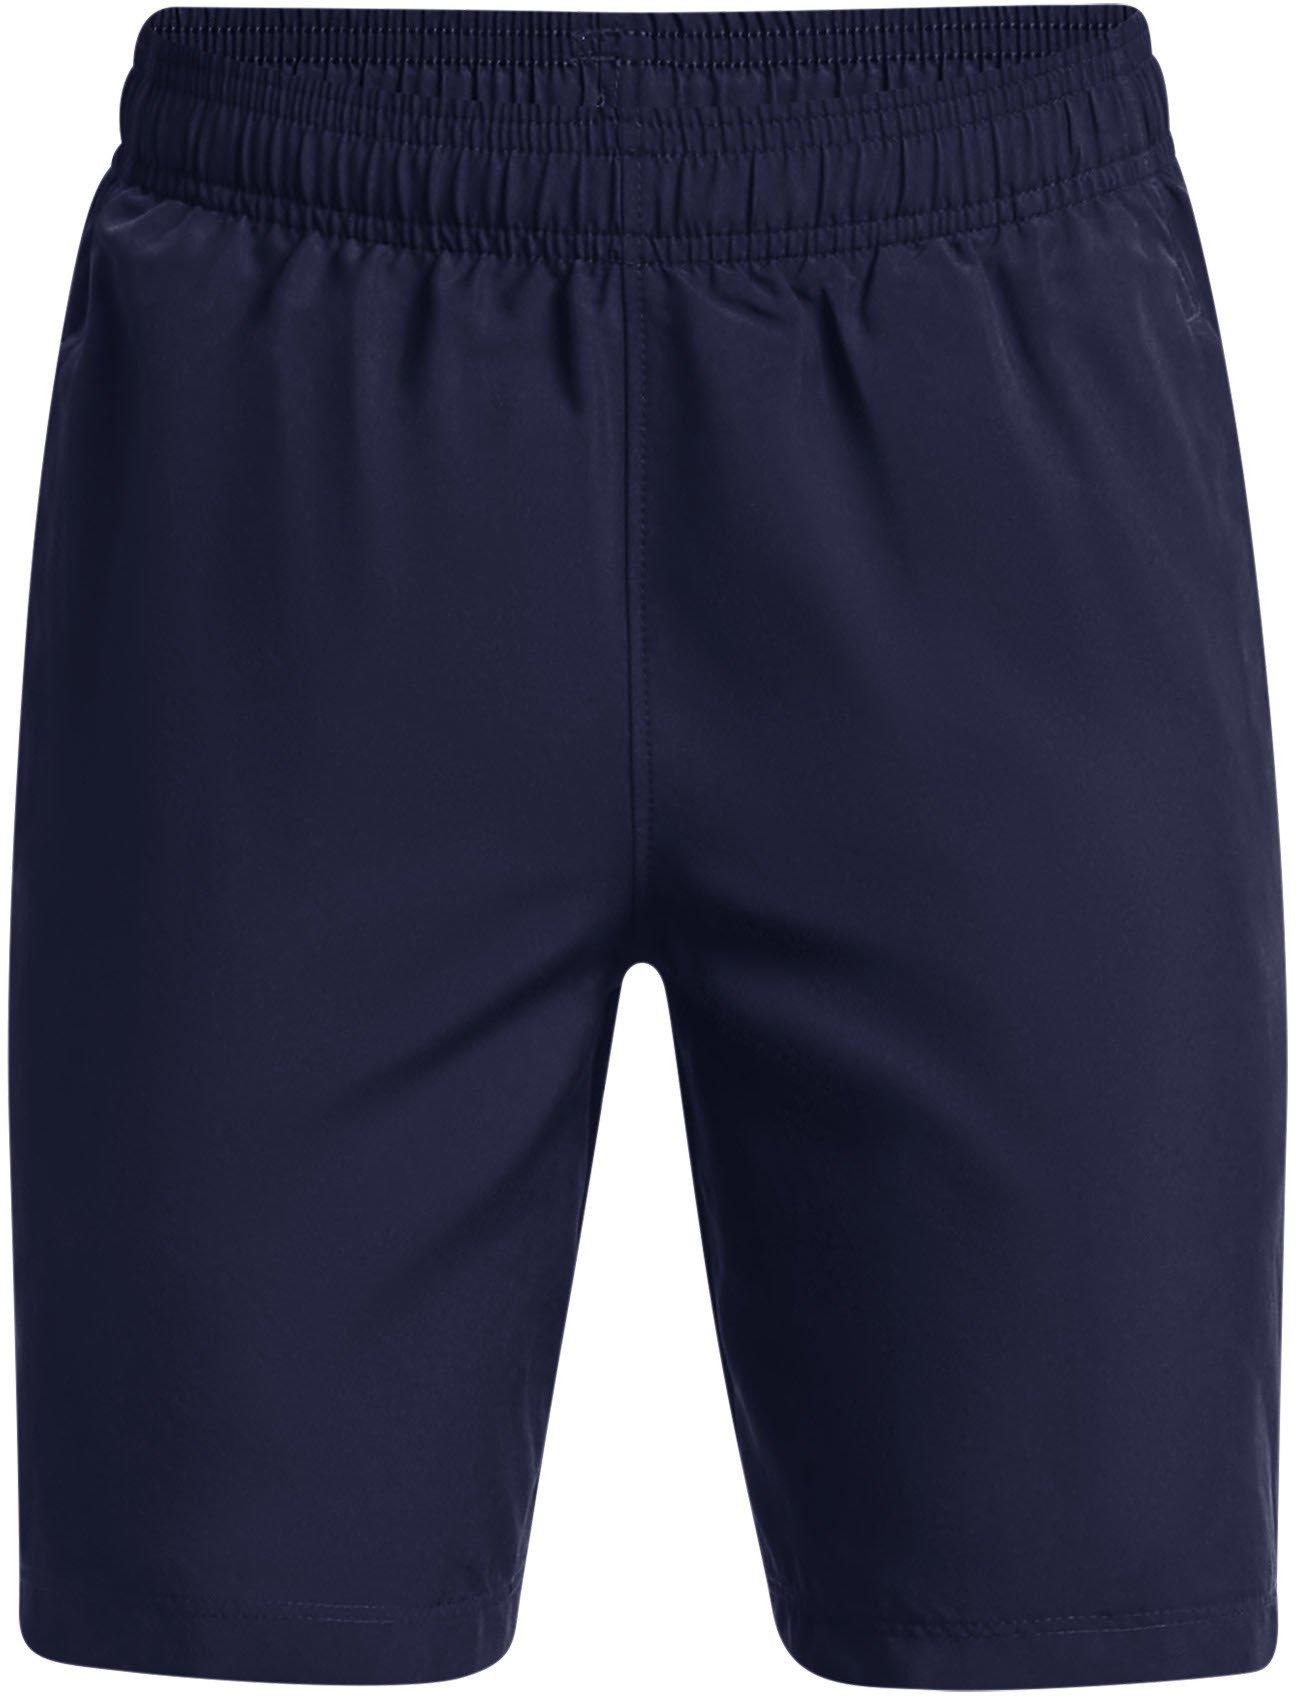 Under Armour Woven Graphic Shorts-NVY M